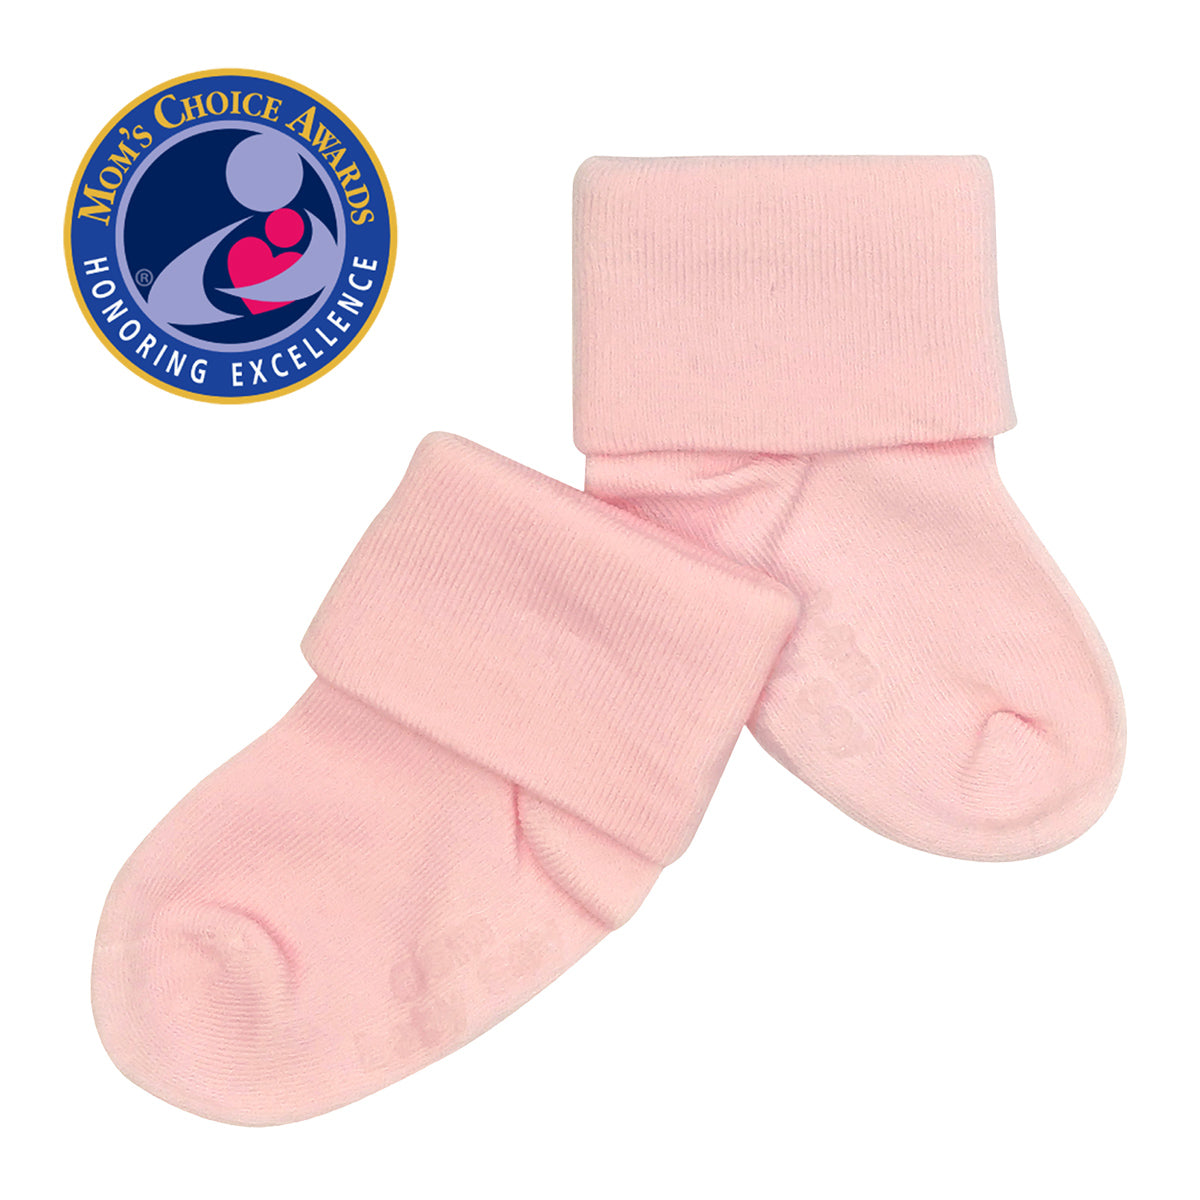 Babysoy Baby Socks Solid Colors That Stay-On with Grips Peony / 6-12 Months